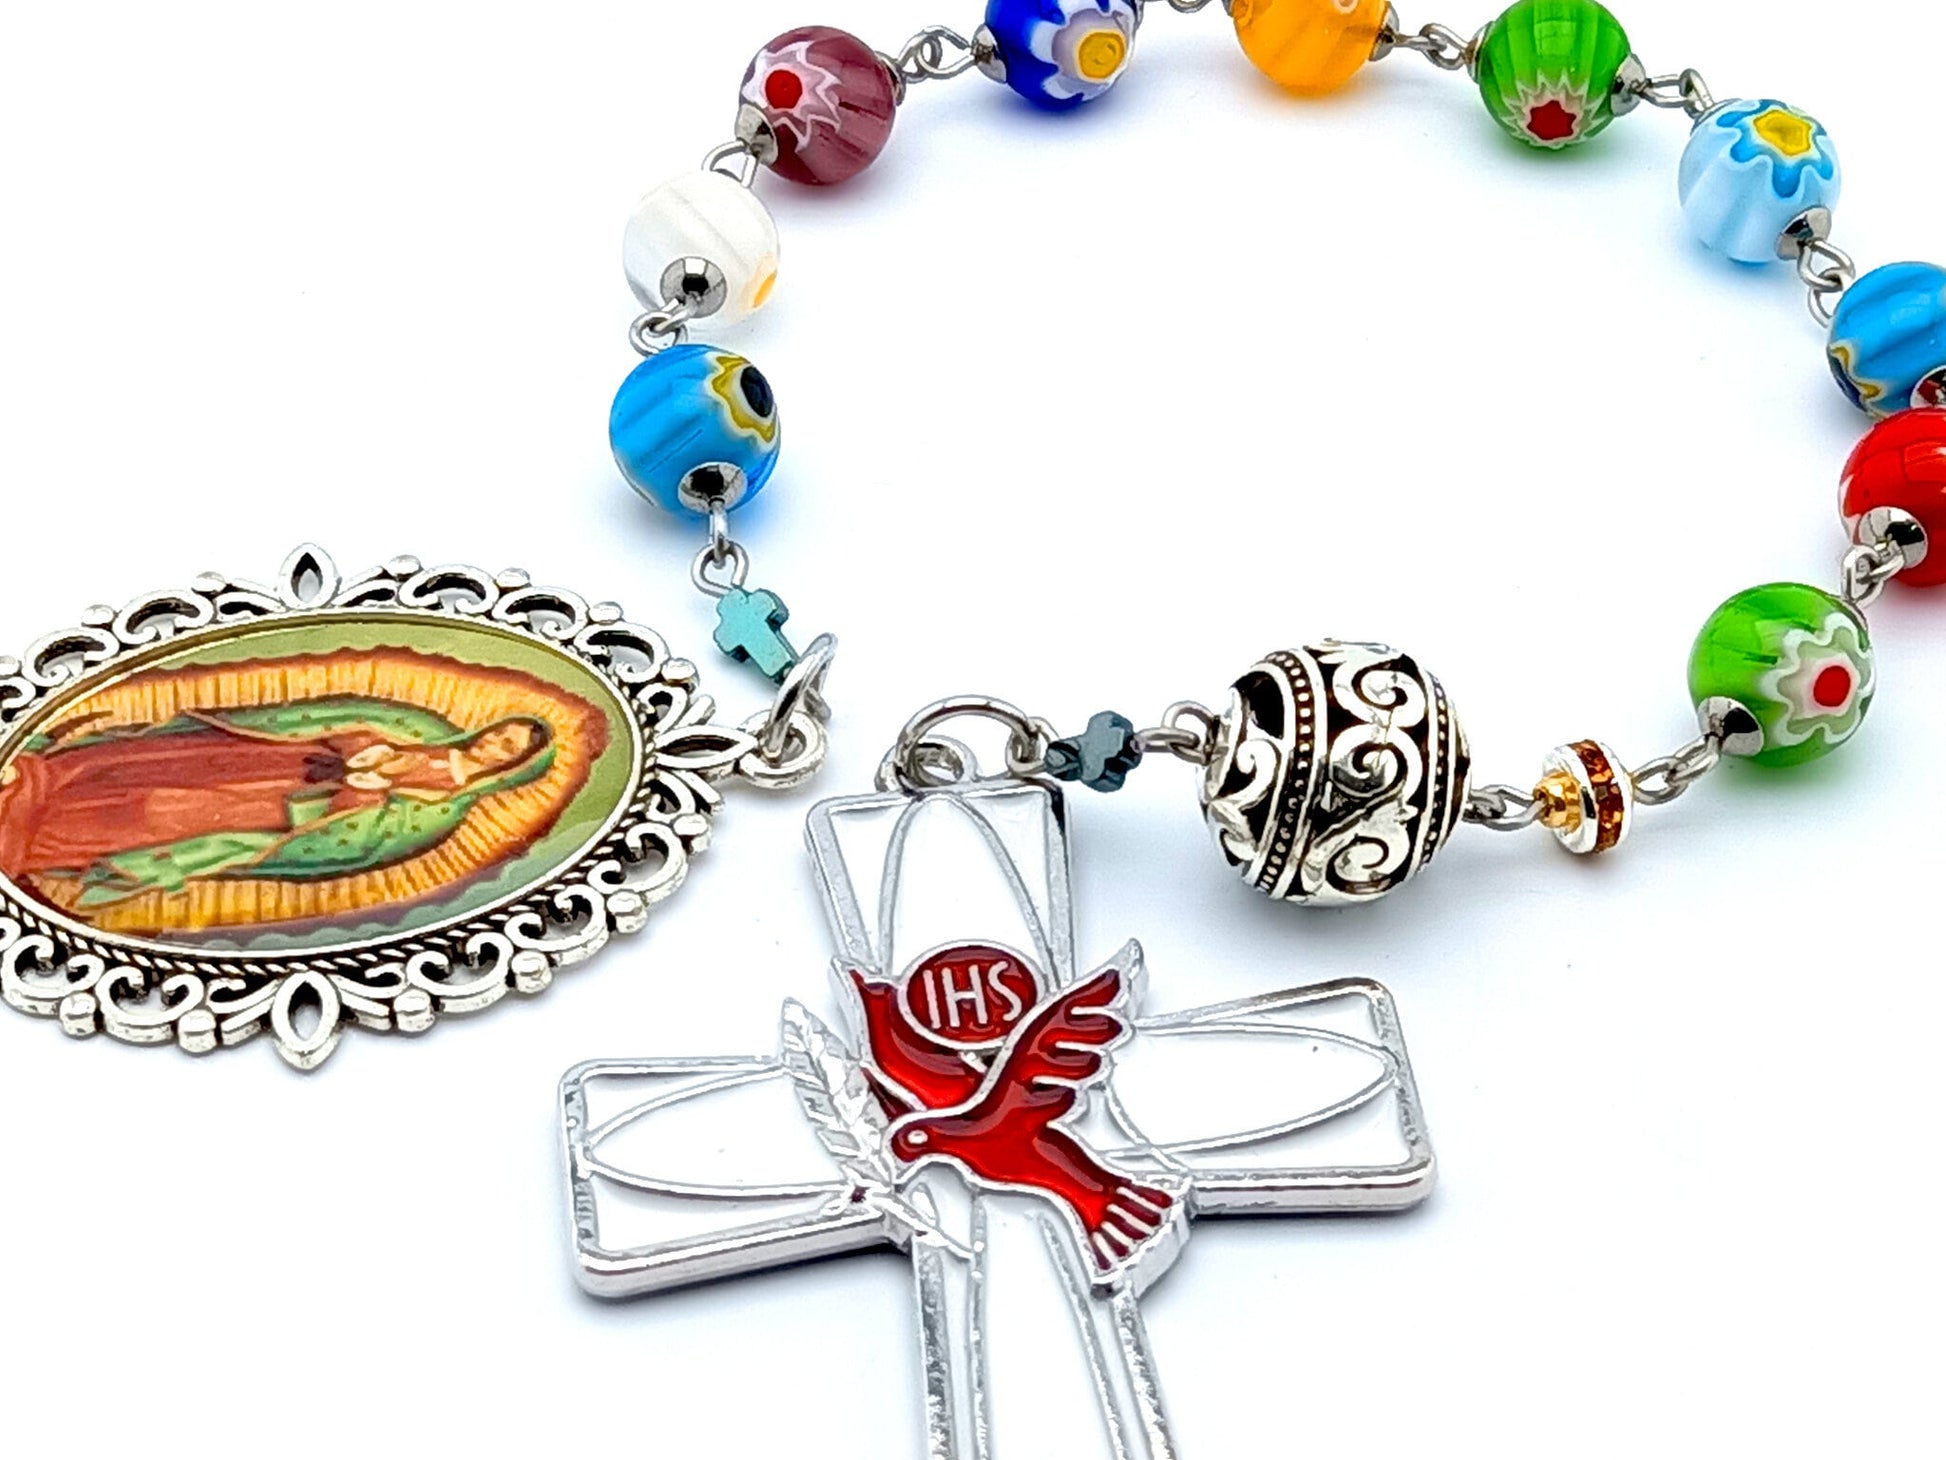 Our Lady of Guadalupe unique rosary beads single decade rosary with multicoloured millefleur glass and silevr beads, white Holy Spirit crucifix and silver poicture medal.